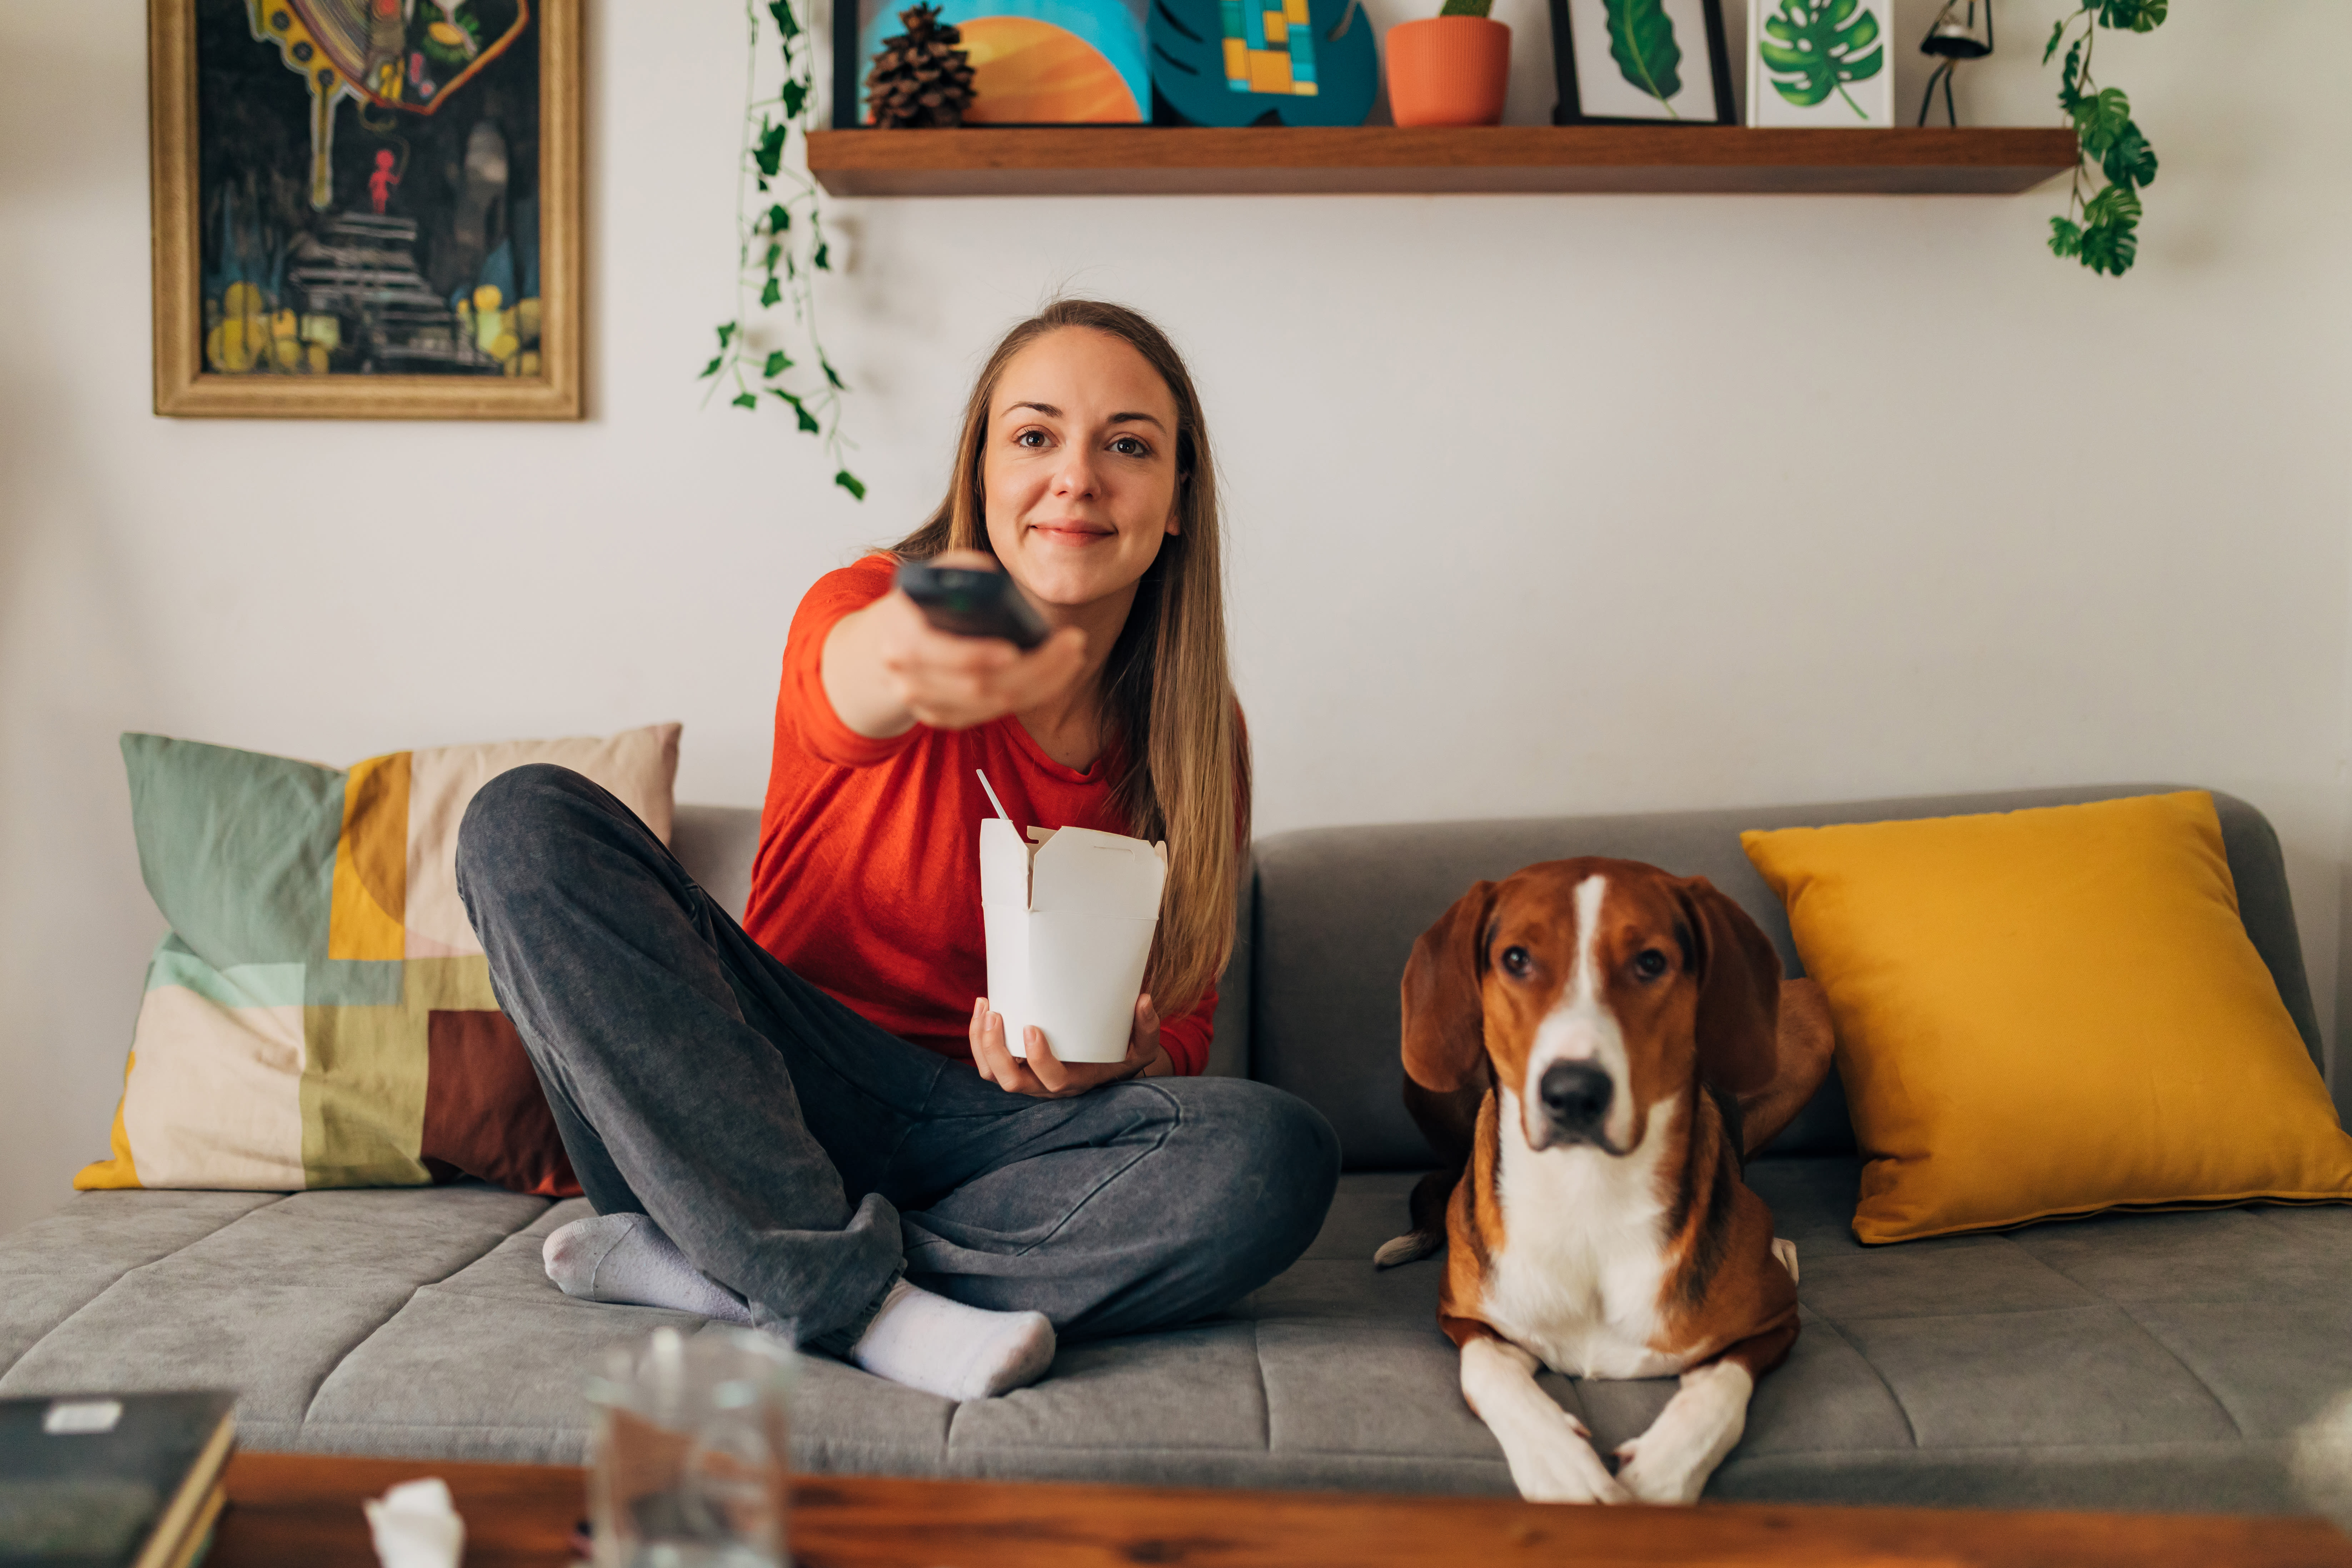 The reasons why almost half of Americans prefer to watch TV with their dogs